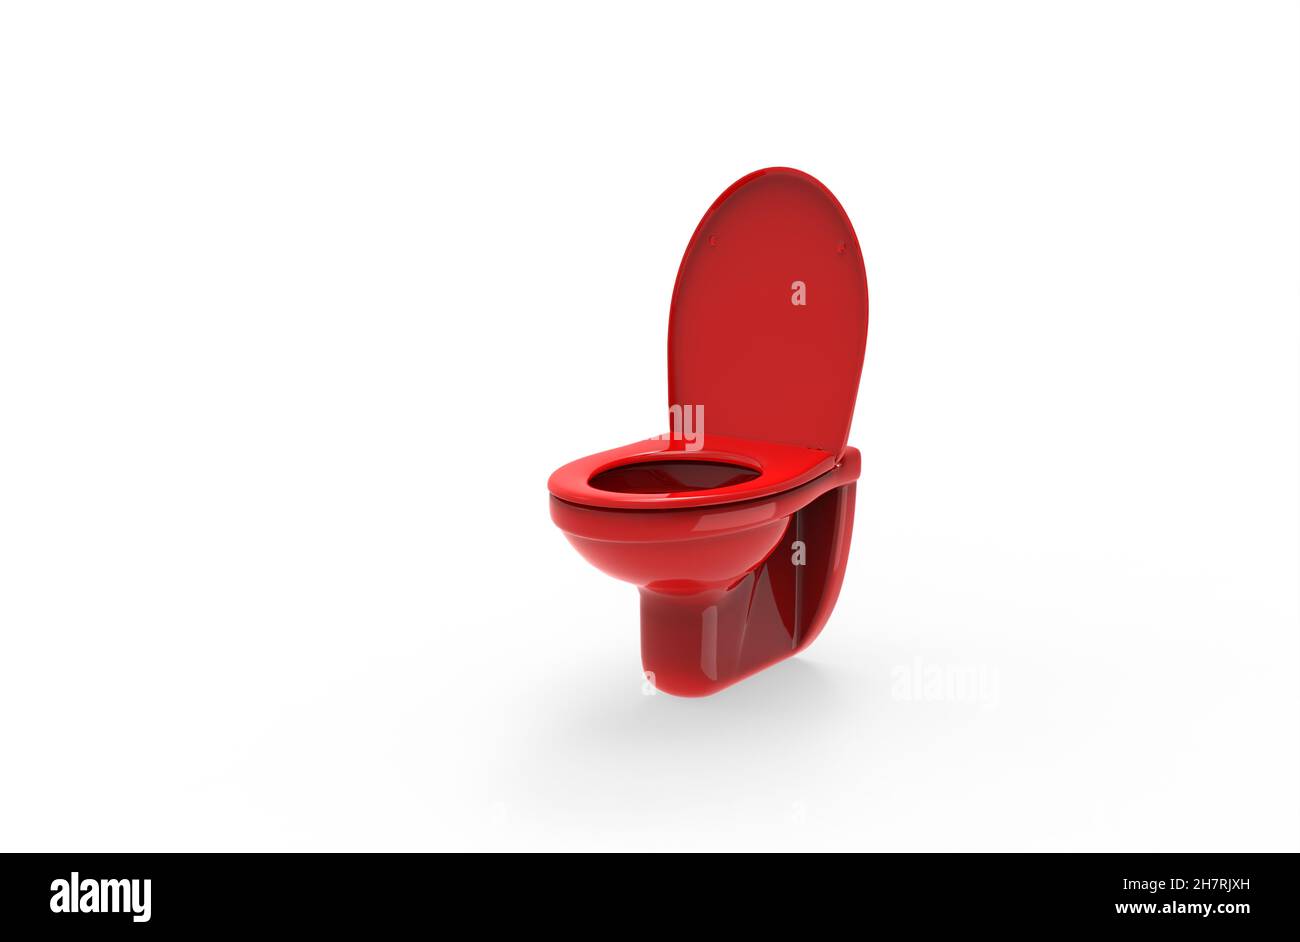 Modern toilet red seat Cut Out Stock Images & Pictures - Alamy